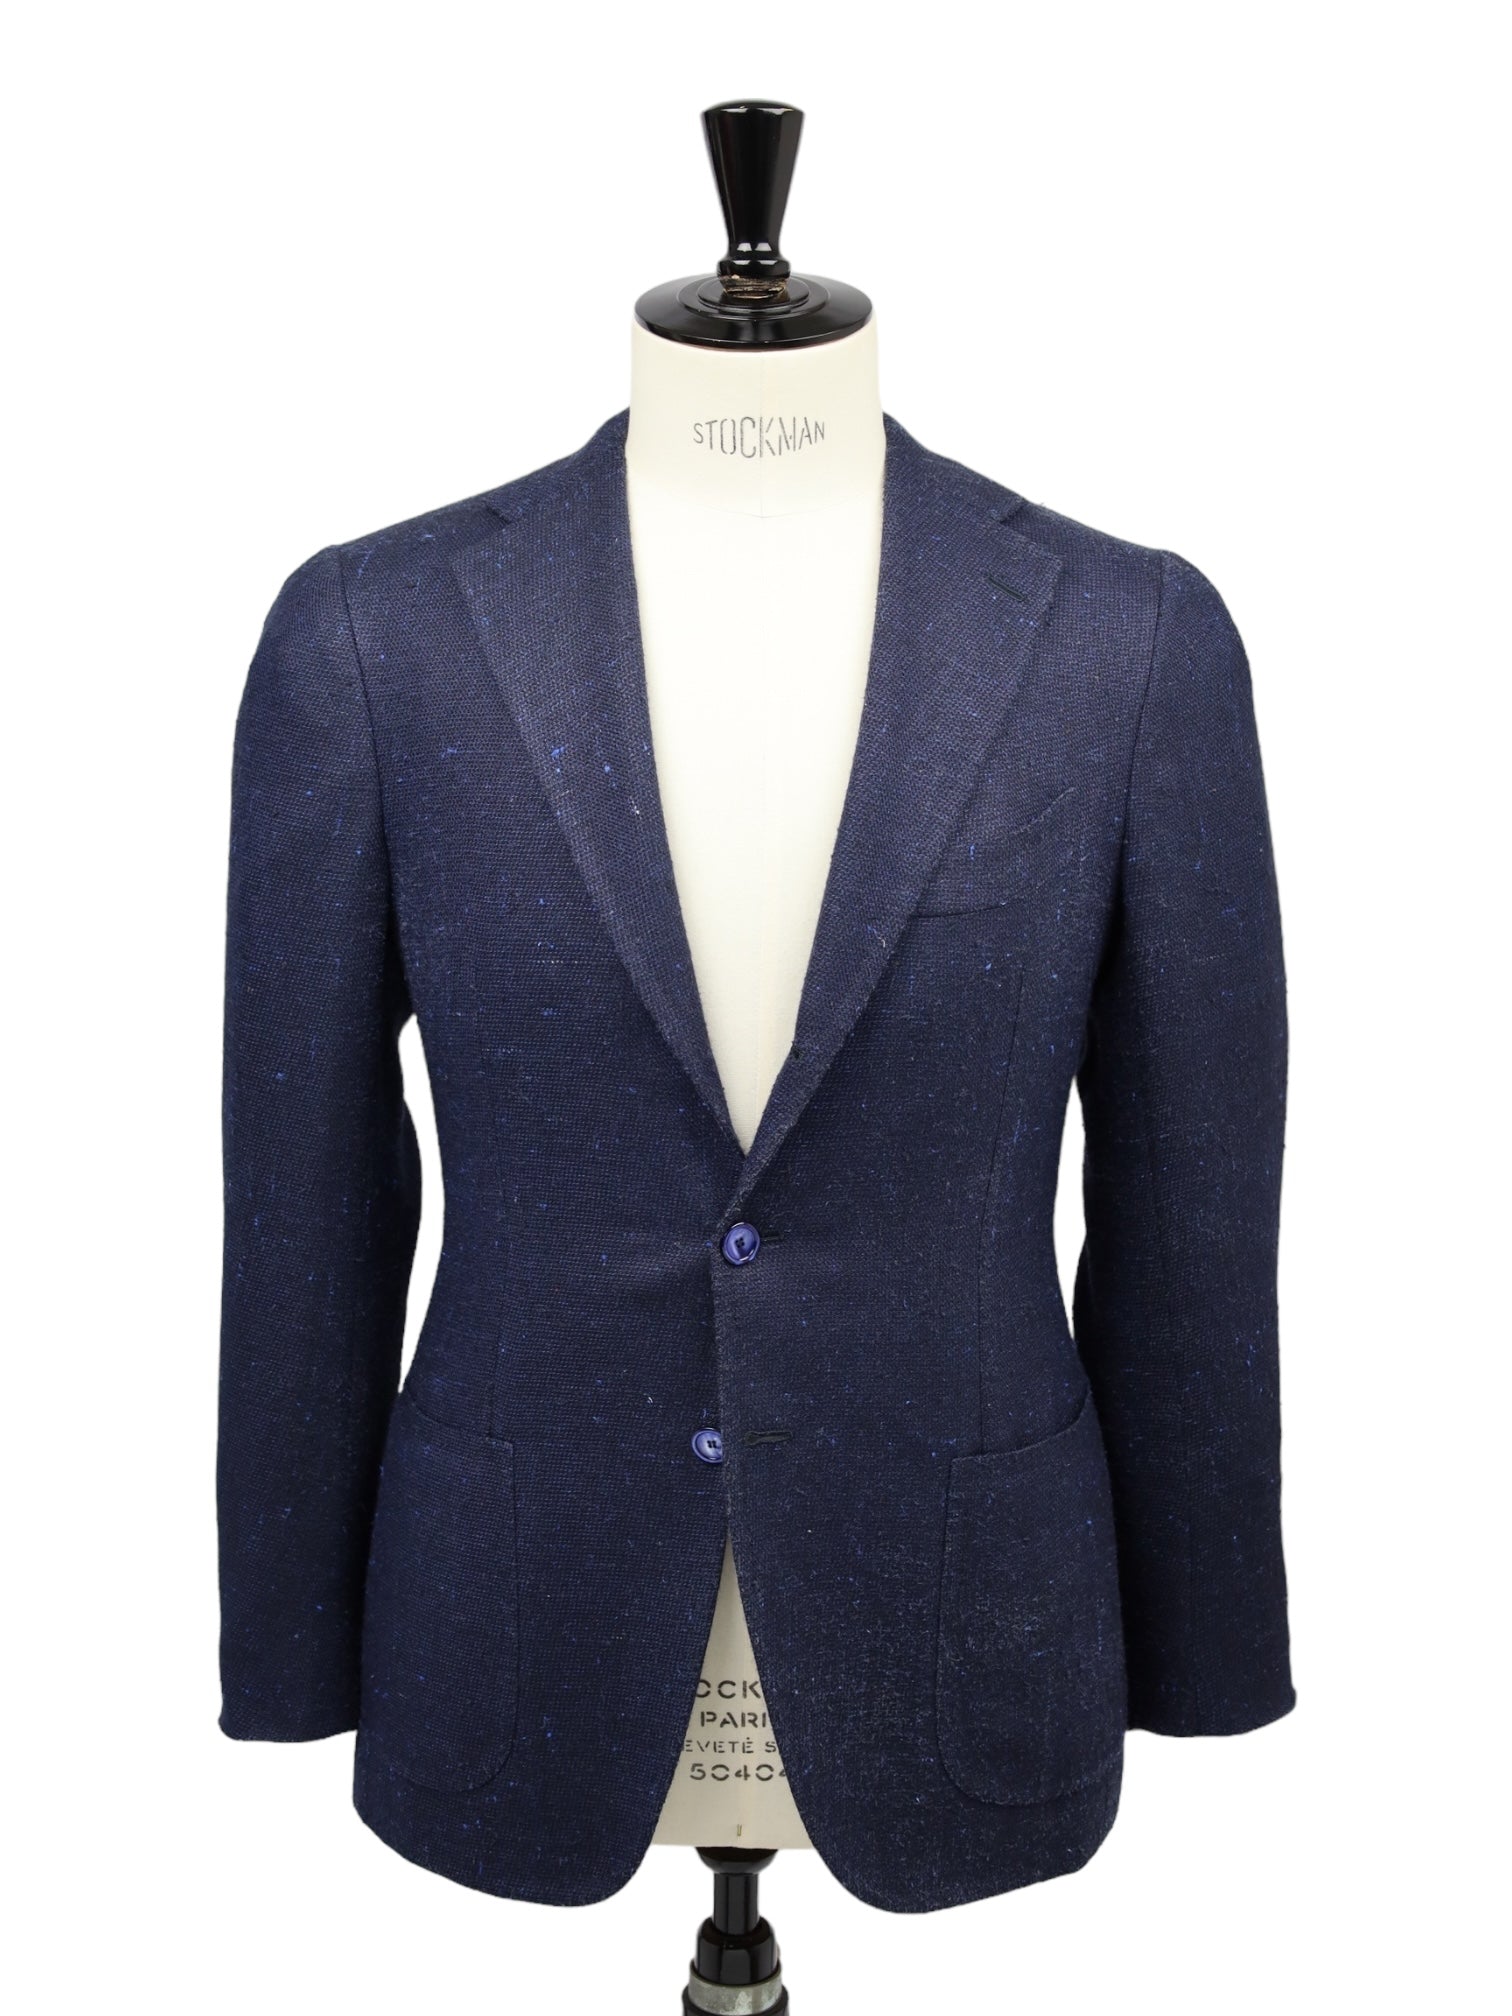 Cesare Attolini Navy and Light Blue Donegal Wool & Silk Jacket